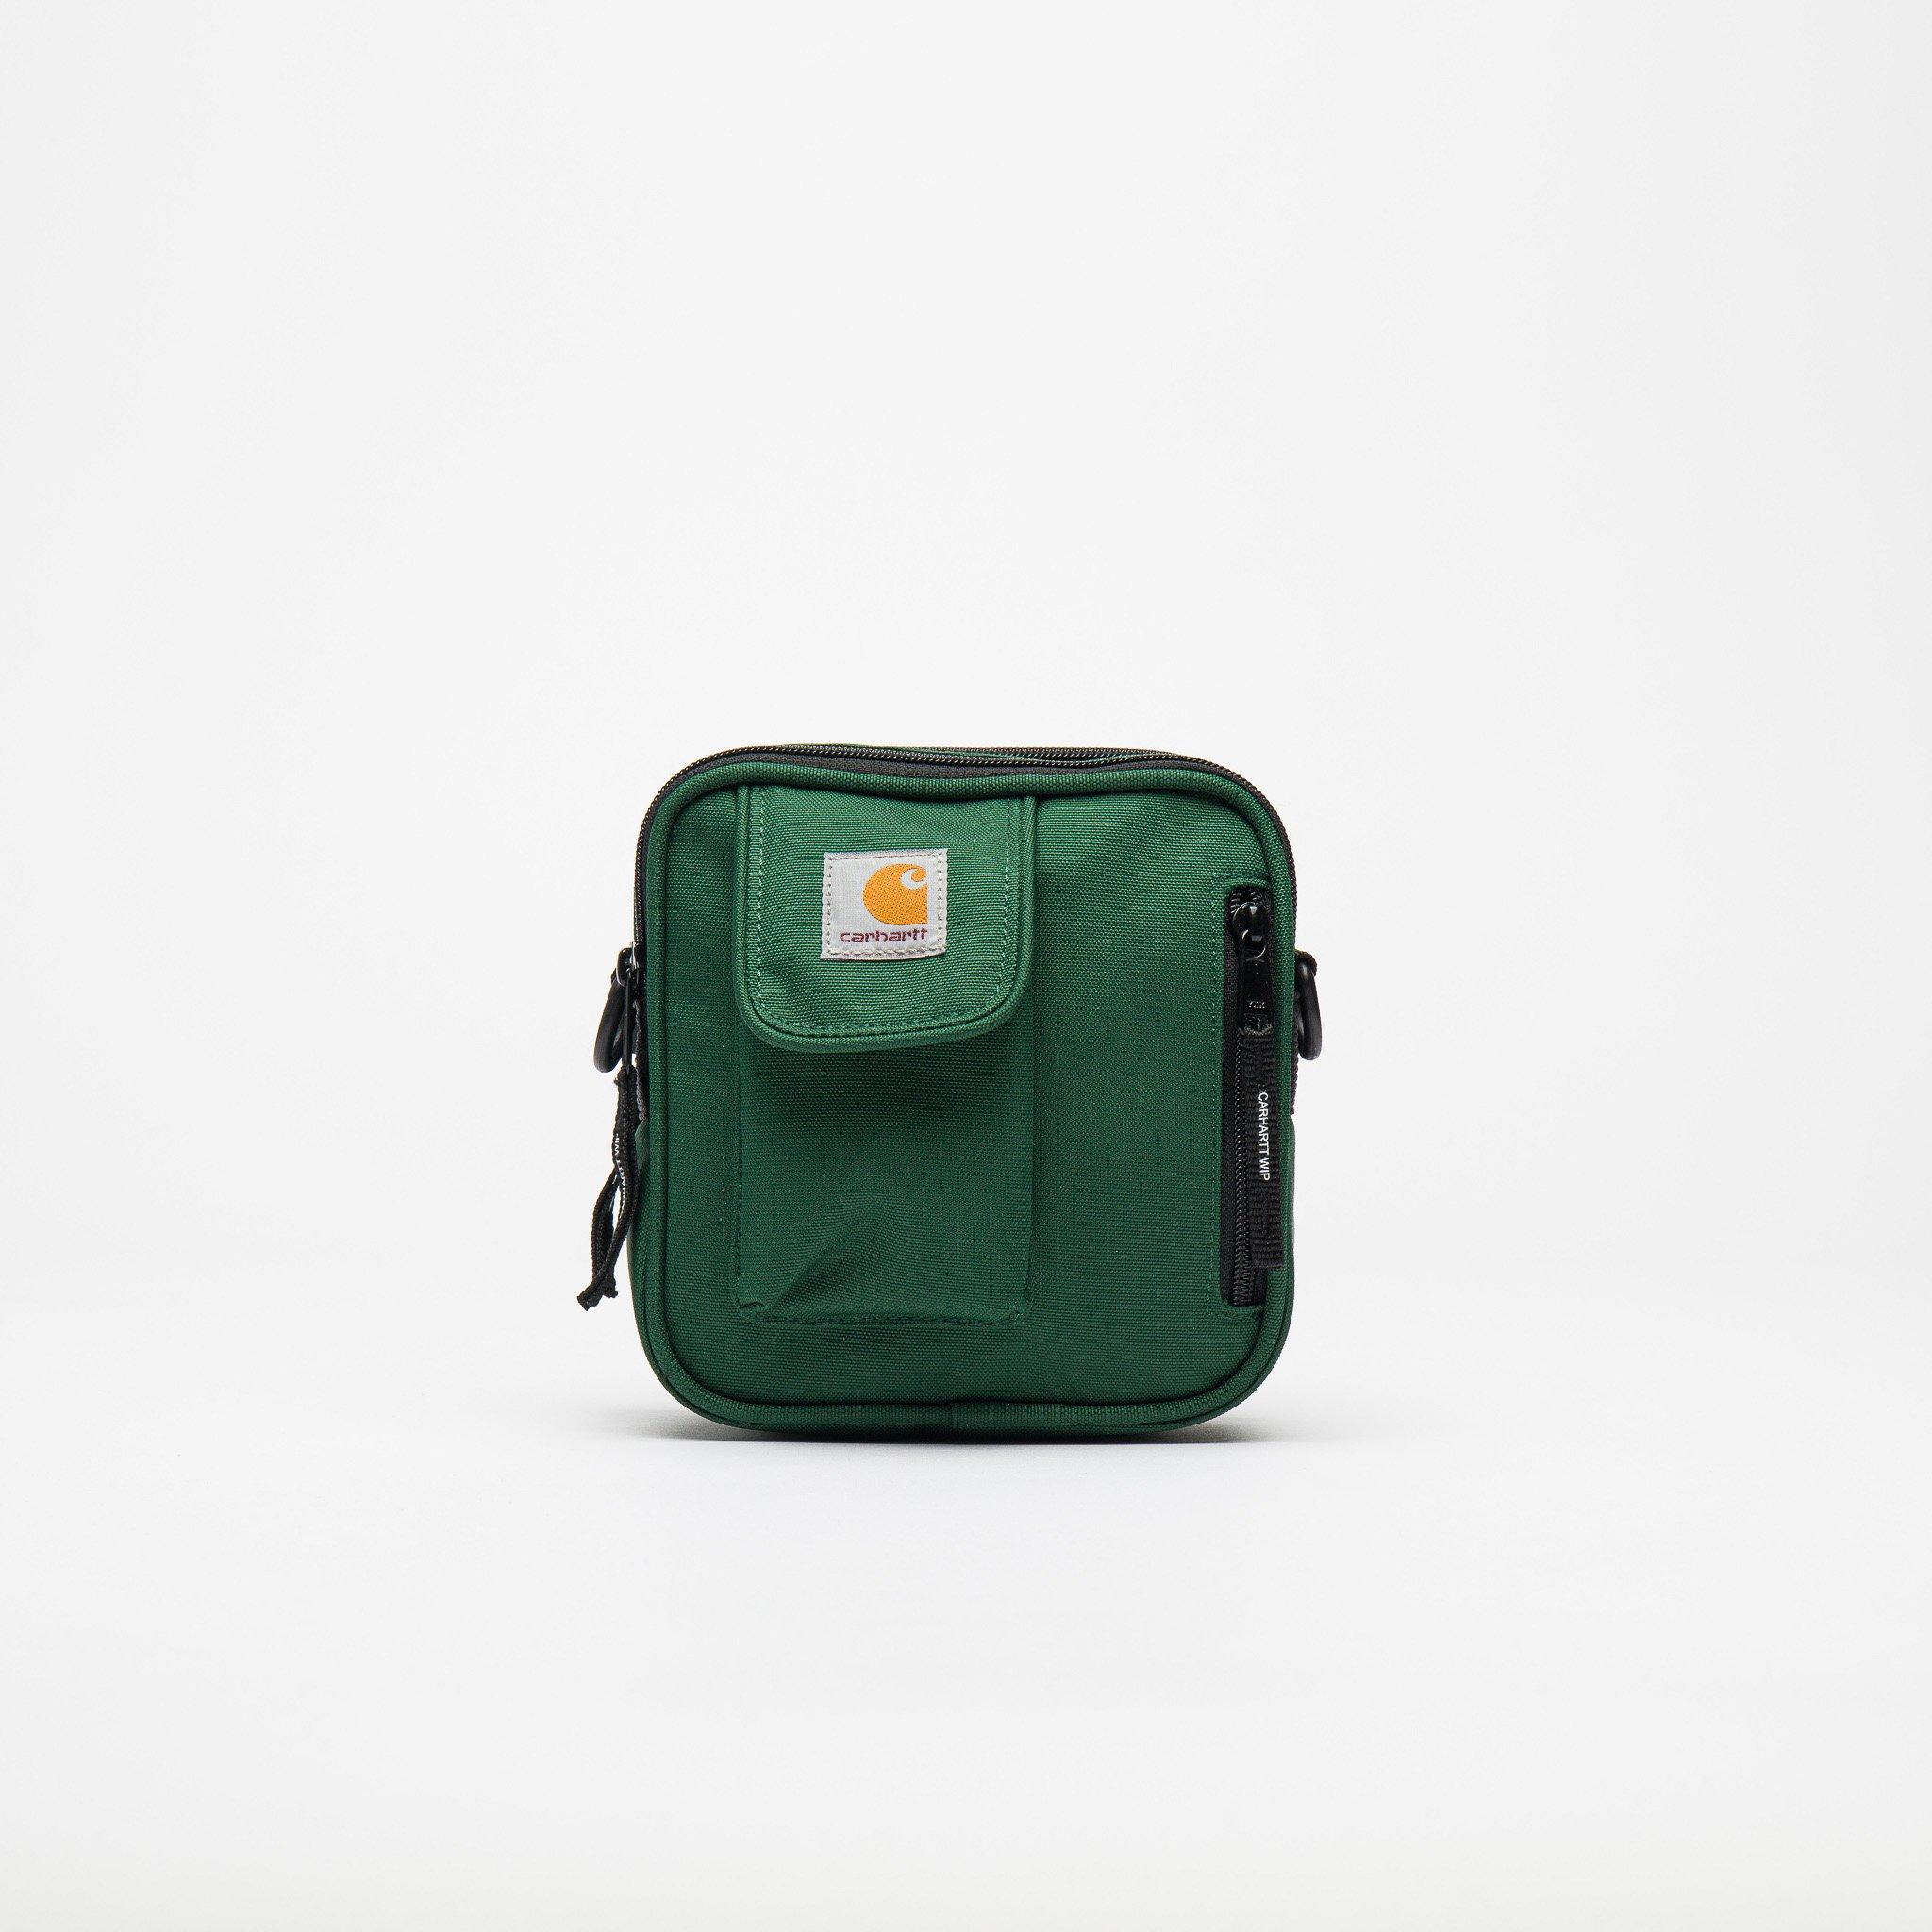 Carhartt WIP Canvas Essentials Small Bag in Green for Men - Lyst